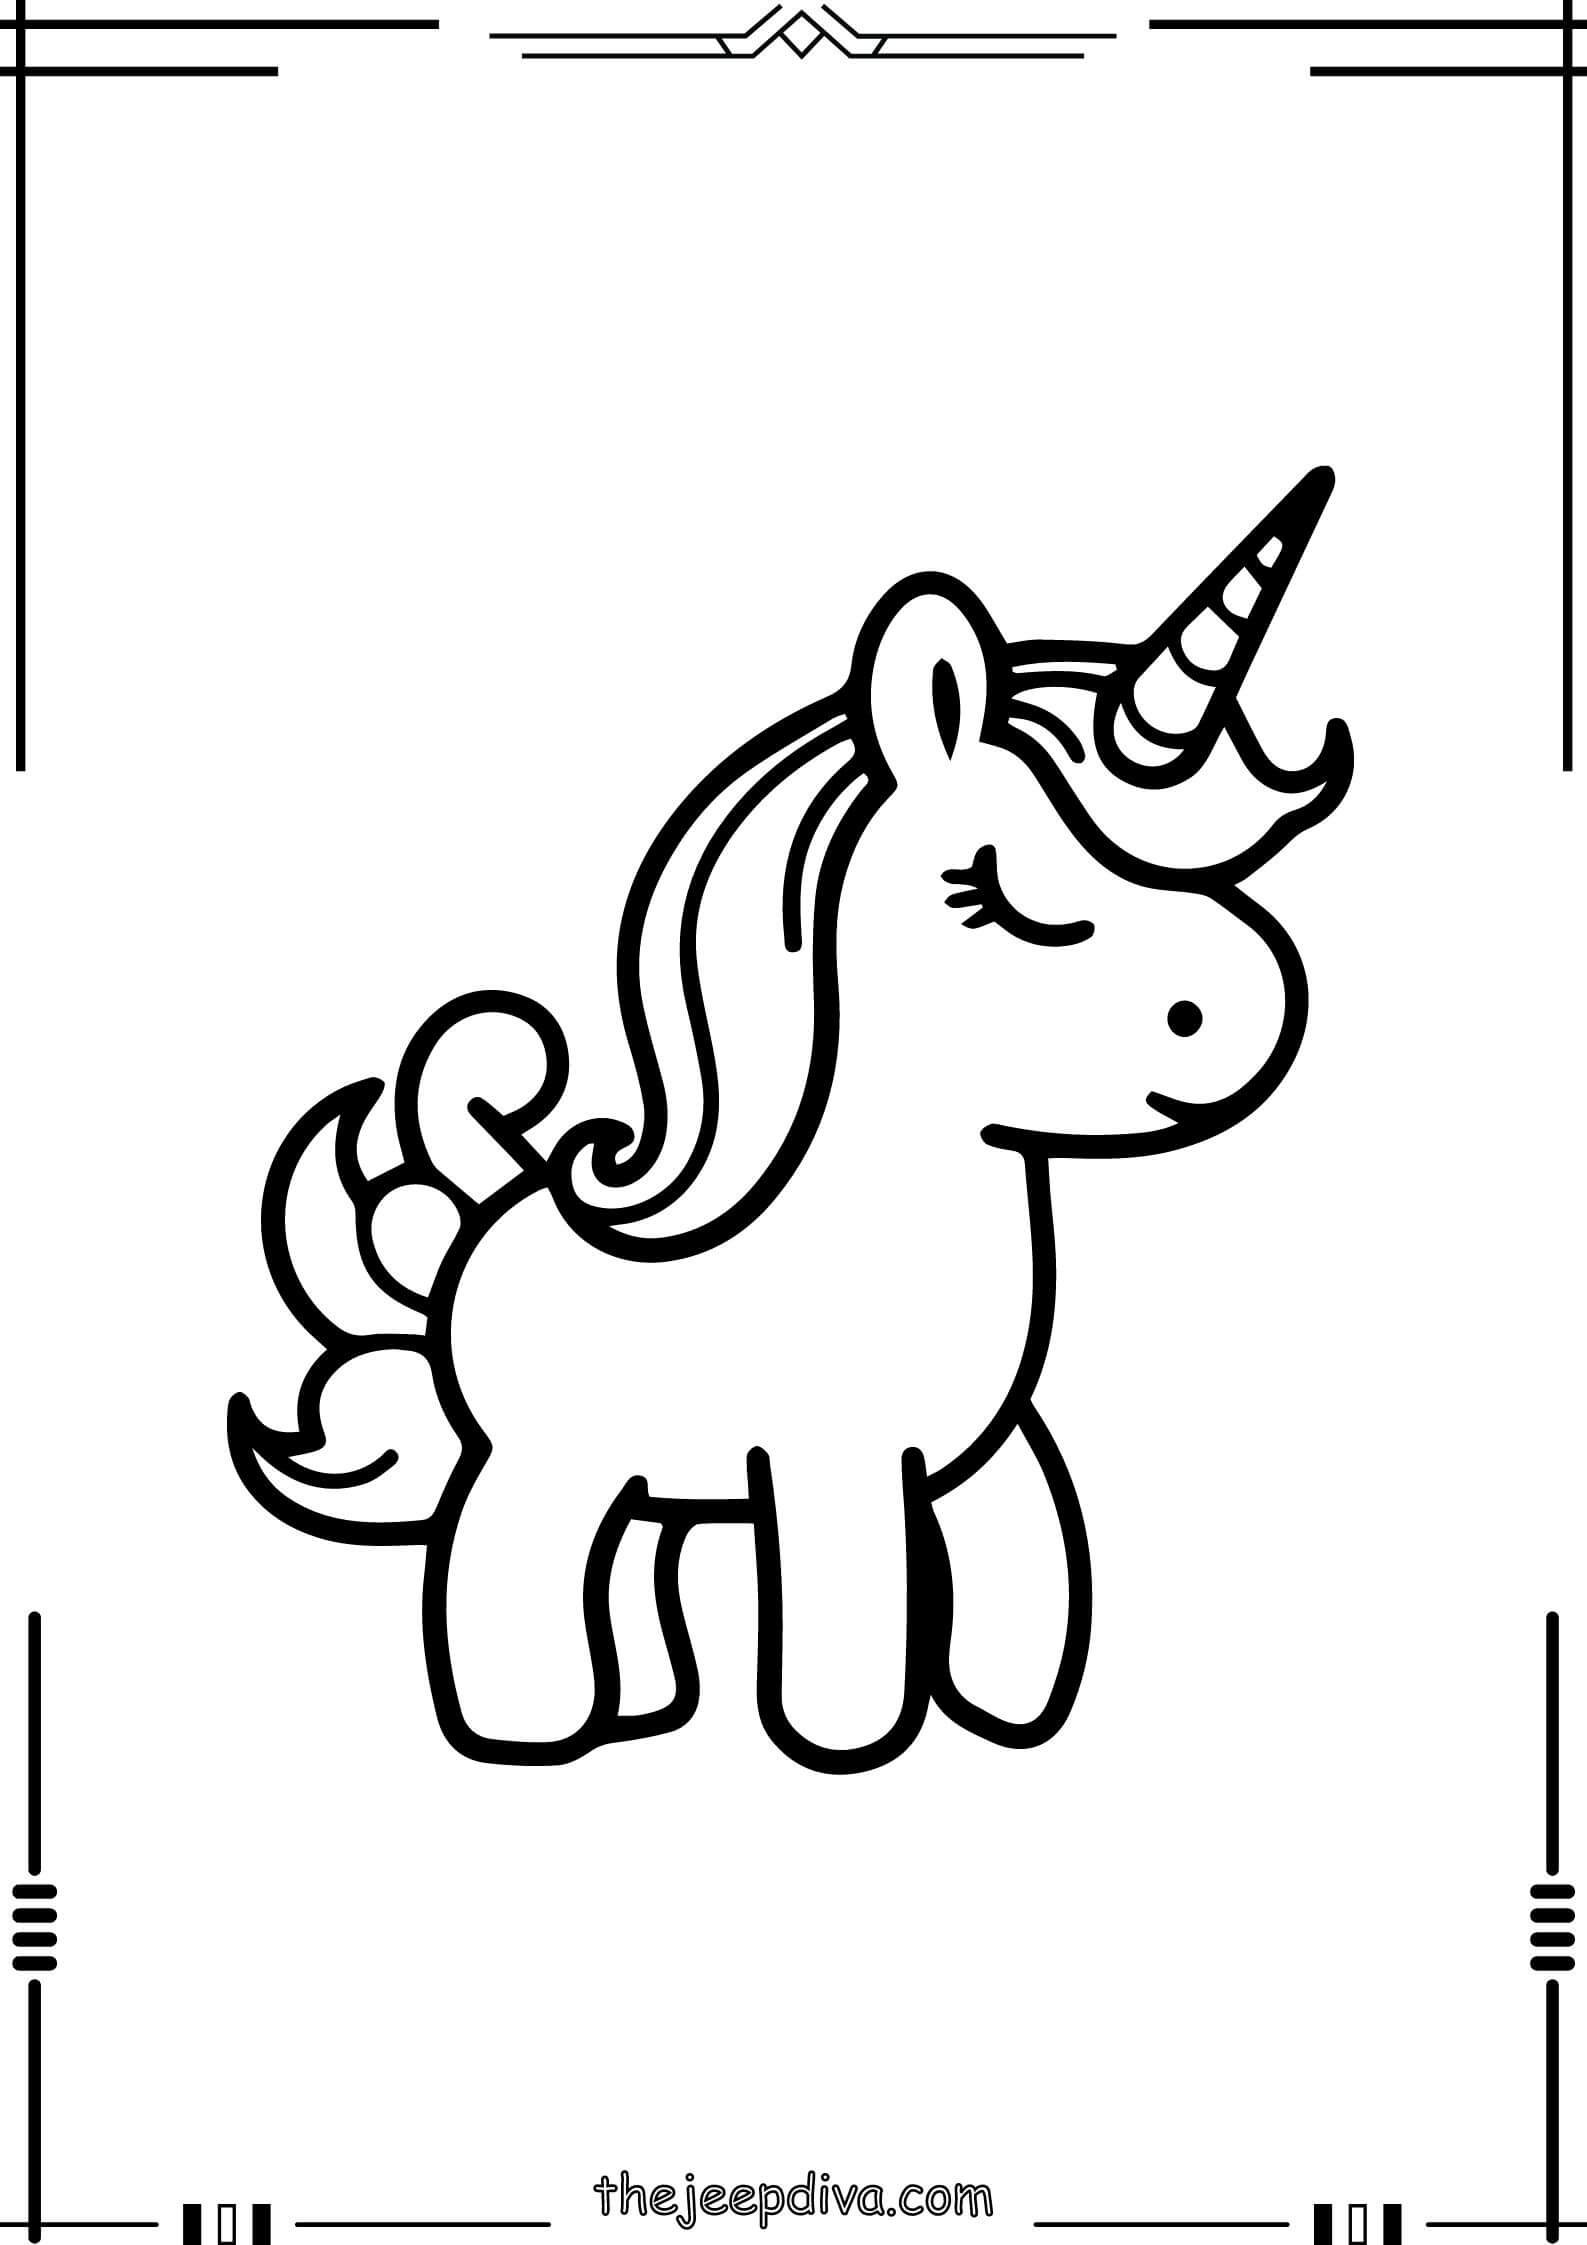 unicorn-coloring-page-easy-2